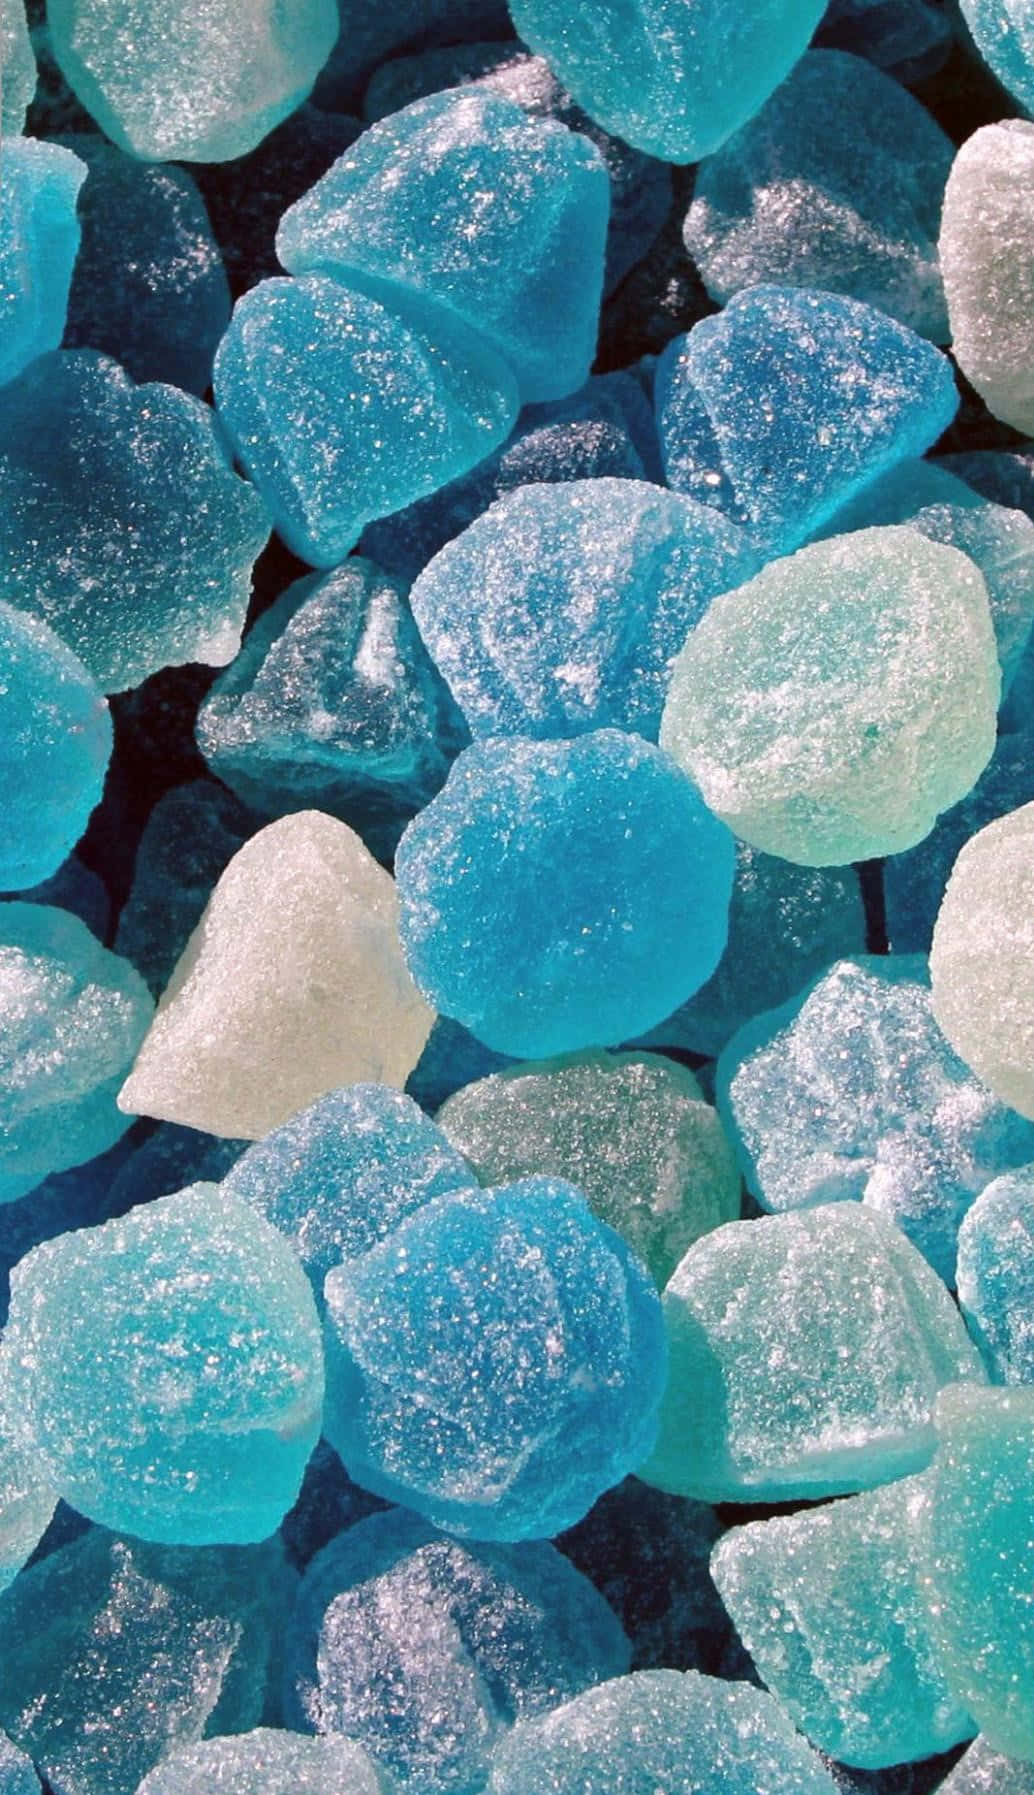 A pile of blue and white sugar coated hard candies - Teal, turquoise